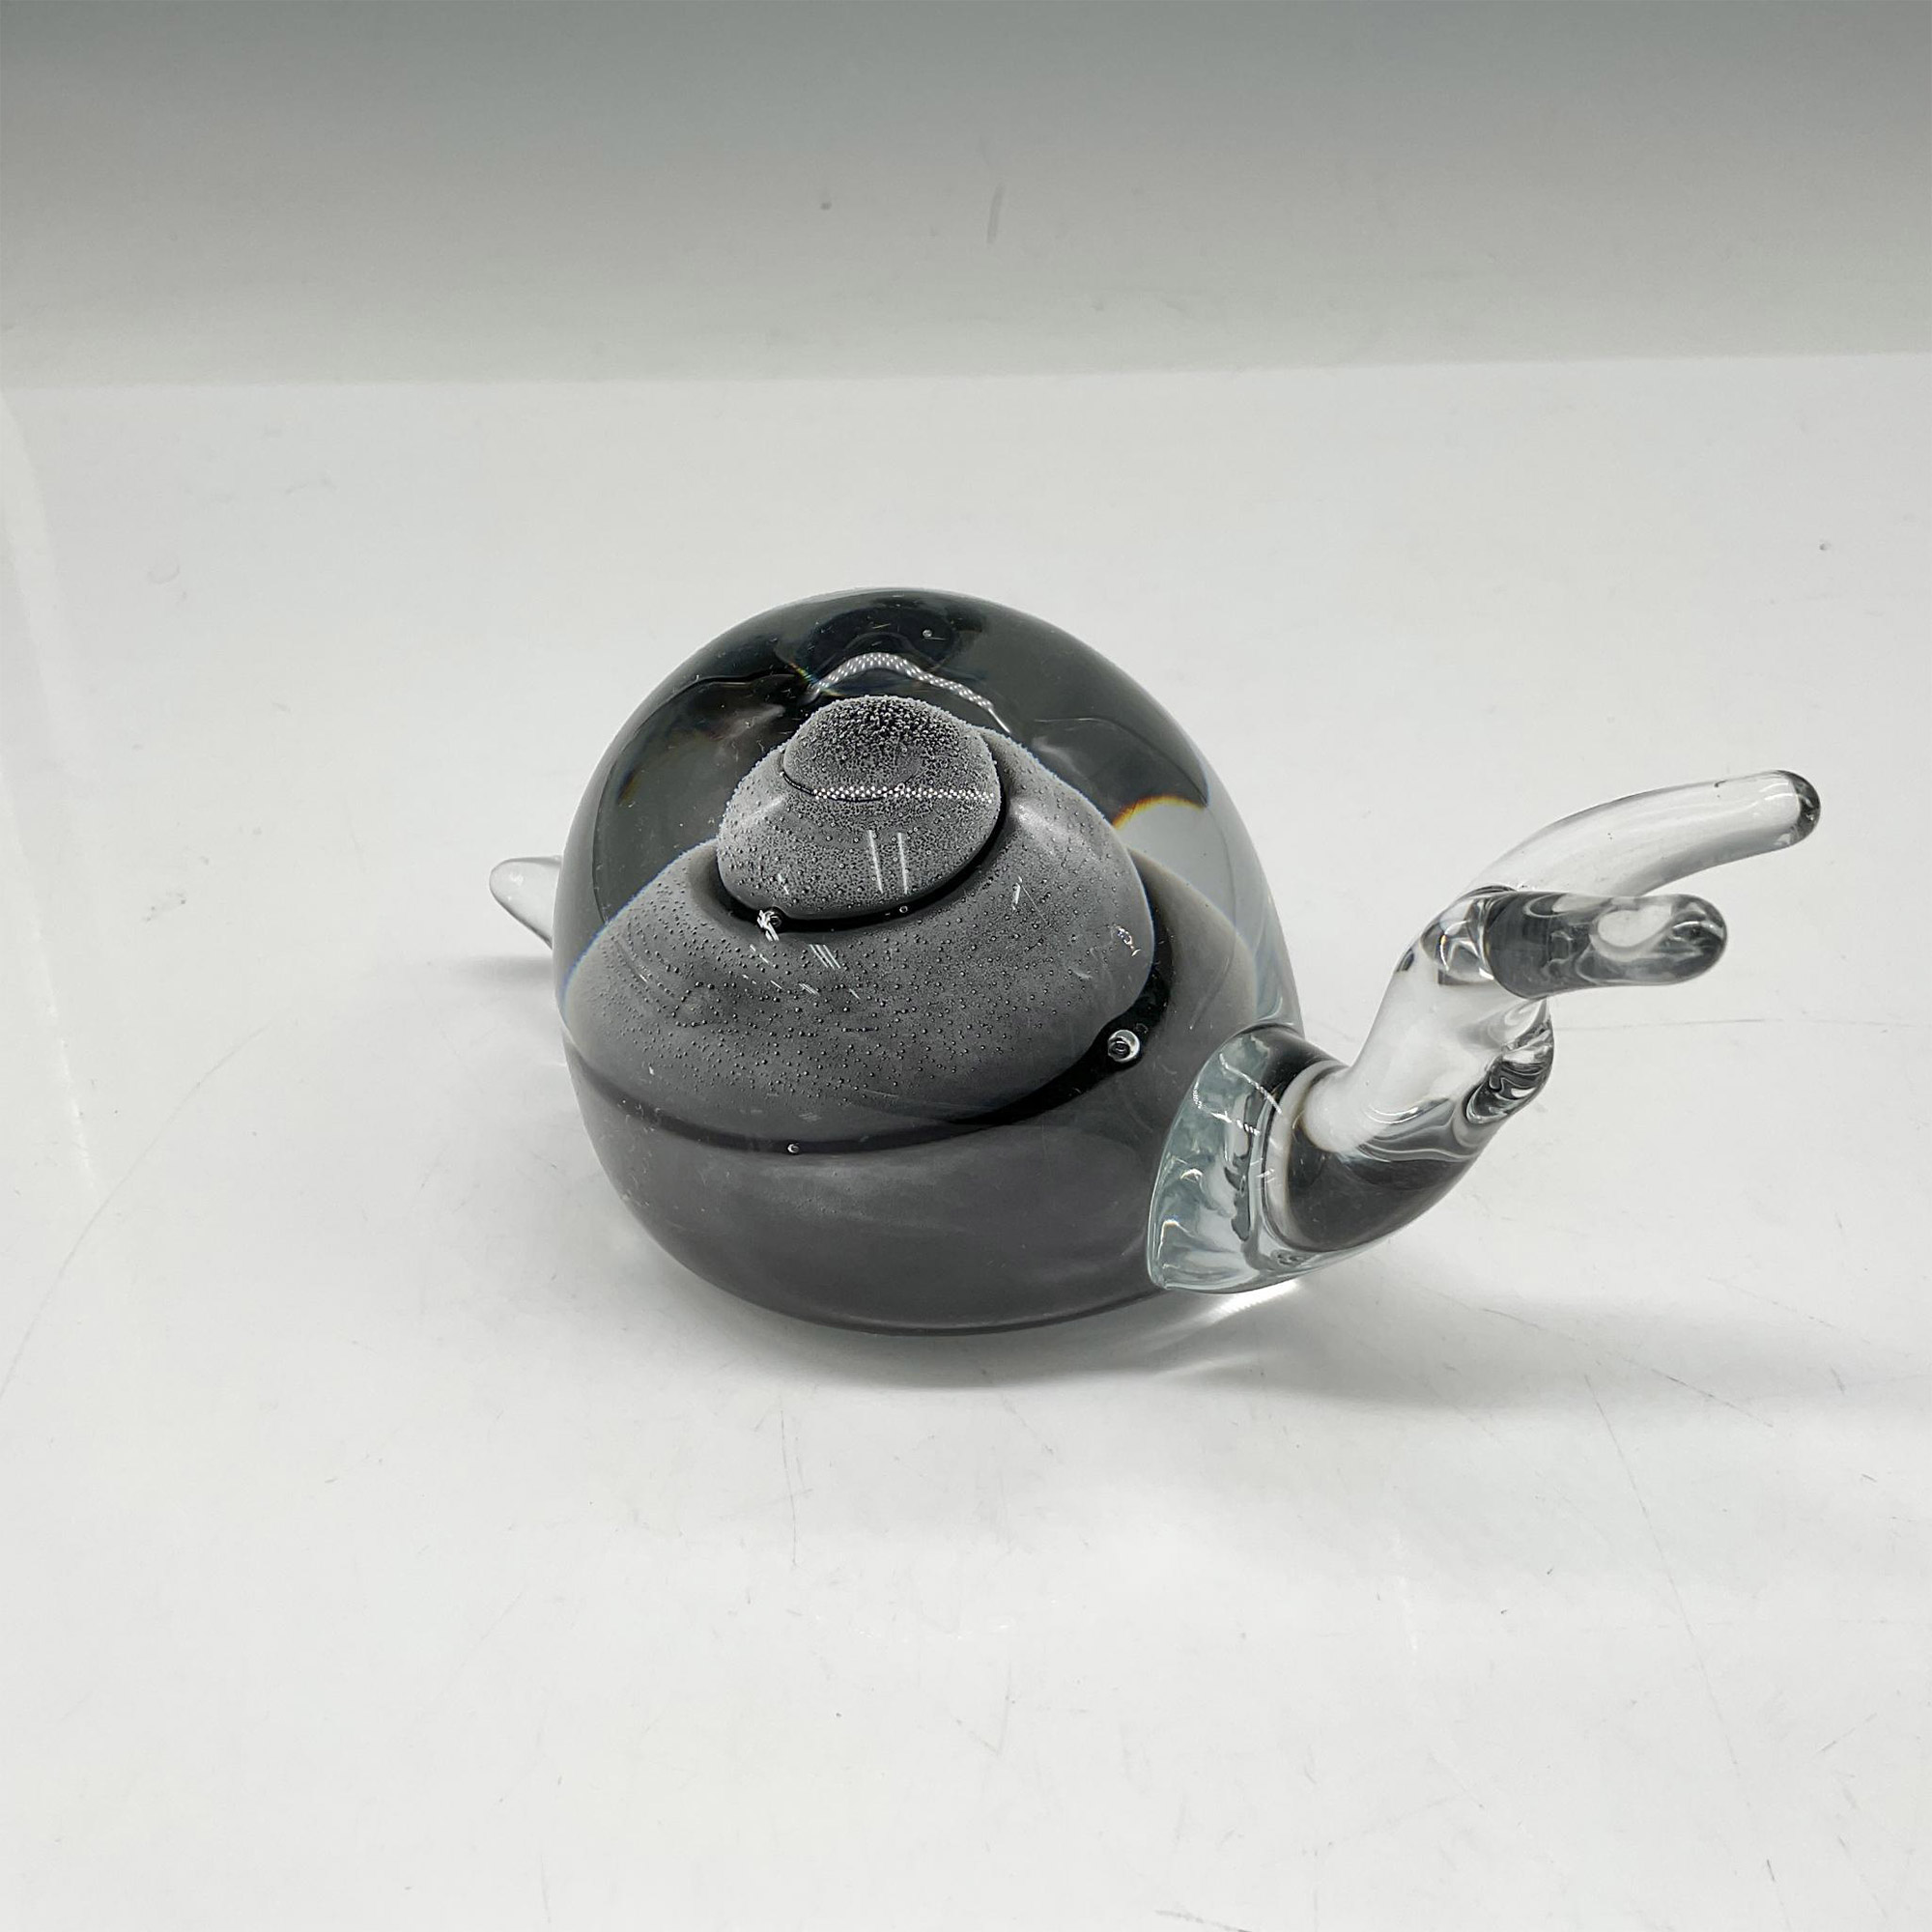 Marcolin Art Crystal Snail Paperweight - Image 2 of 4